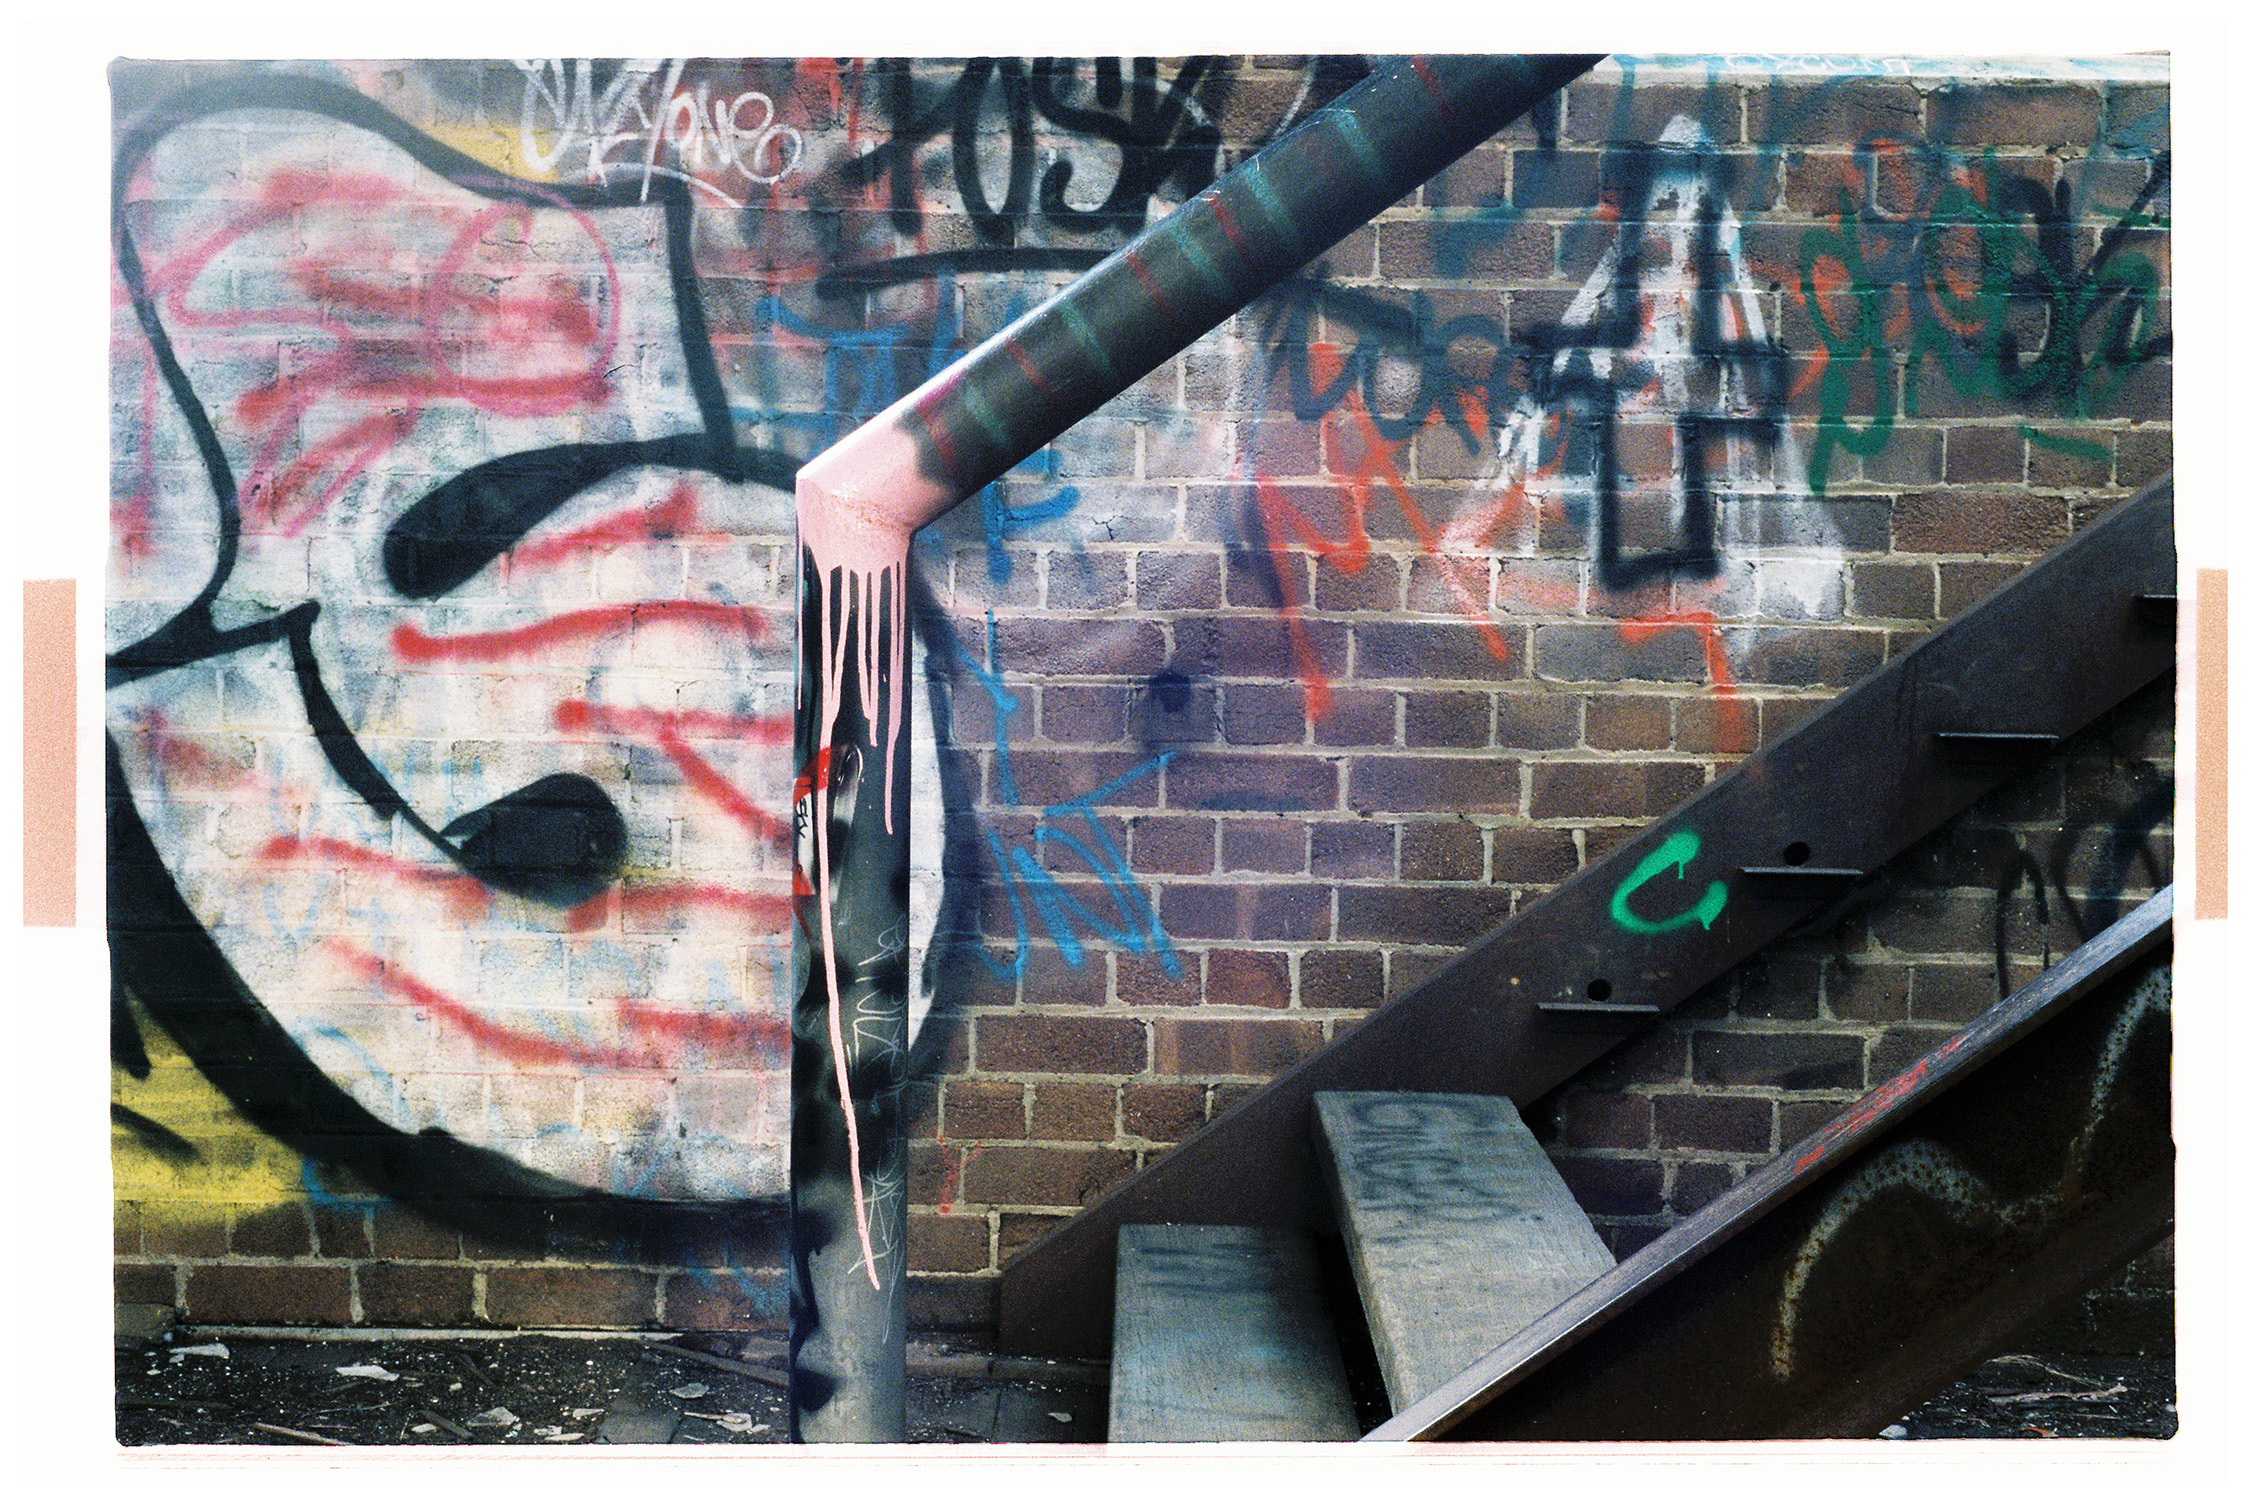 Colourful graffiti is sprayed all over bricks, hand rails of a a broken staircase